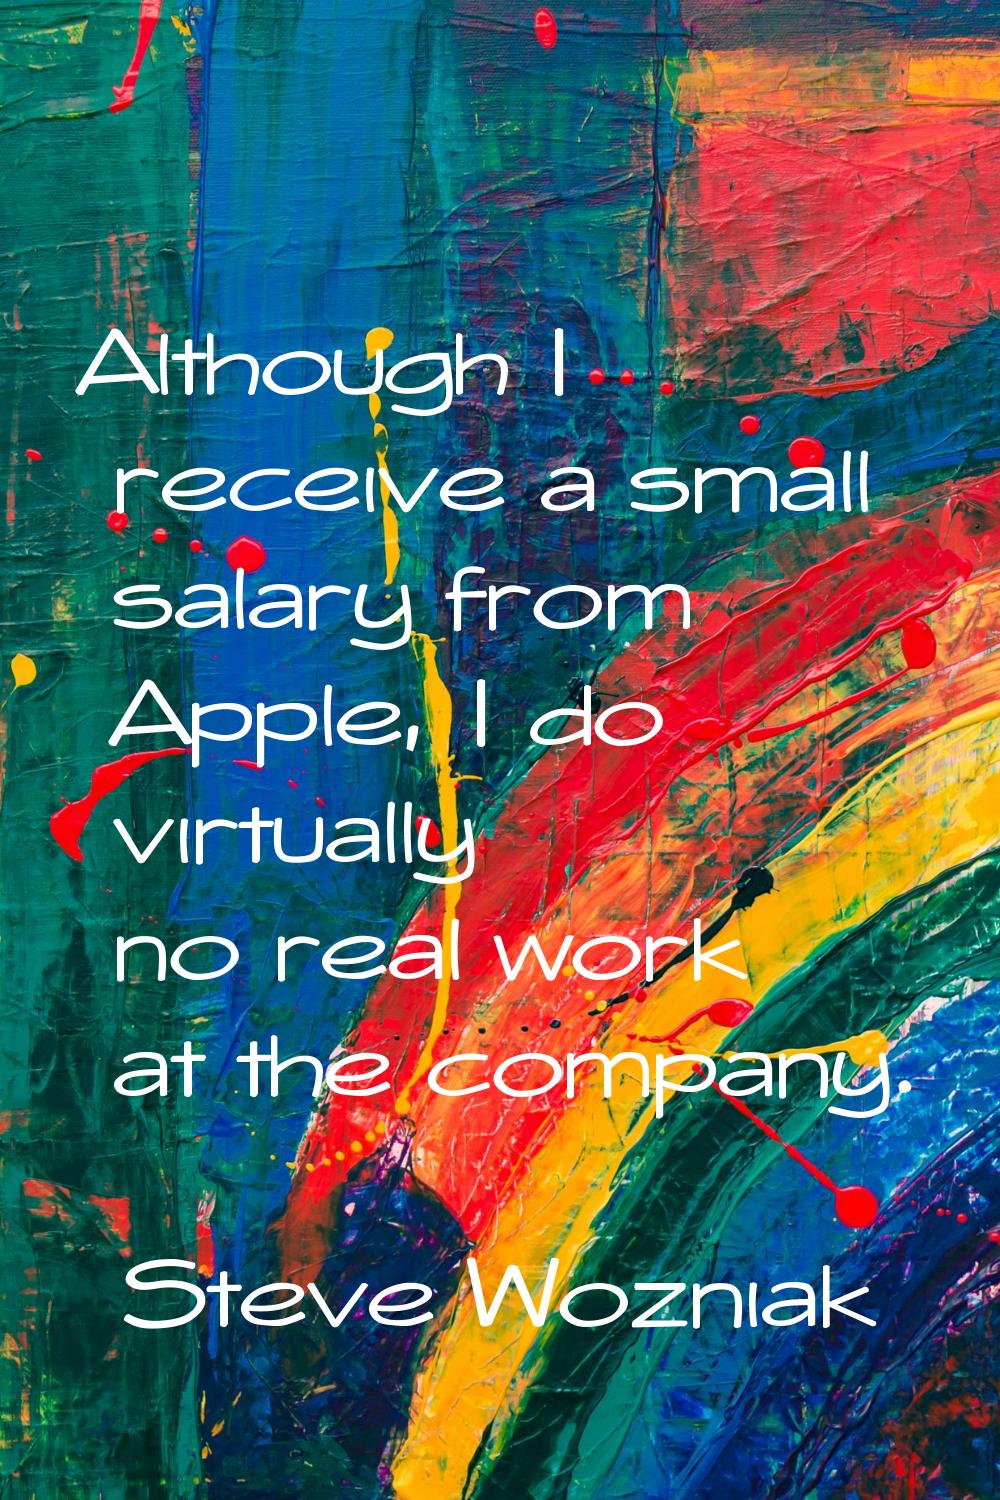 Although I receive a small salary from Apple, I do virtually no real work at the company.